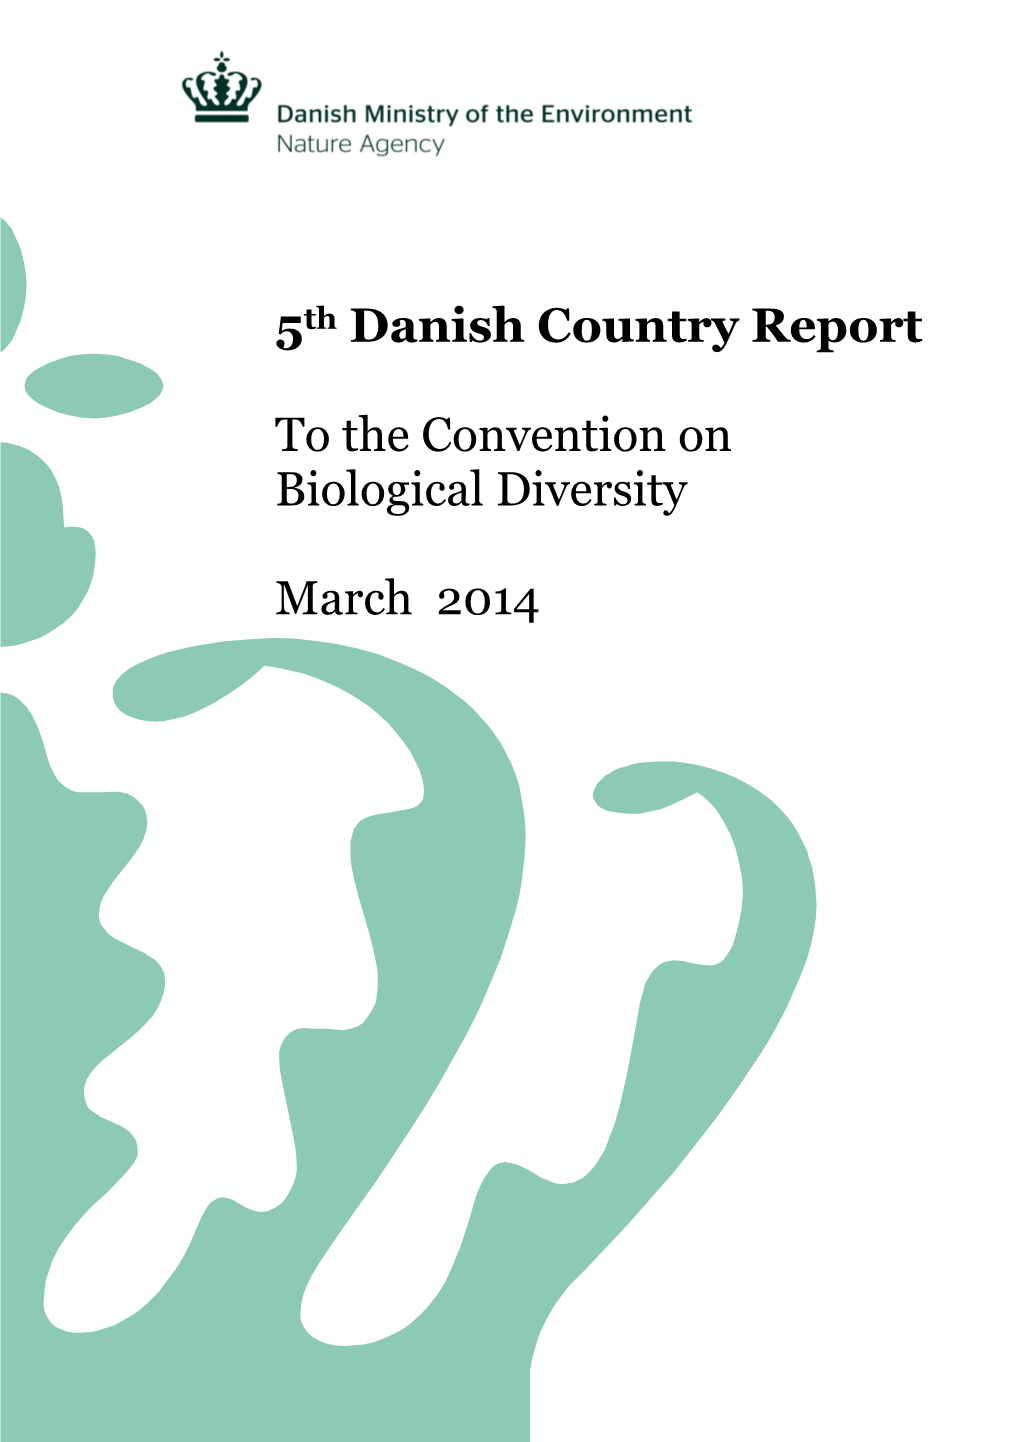 5Th Danish Country Report to the Convention on Biological Diversity